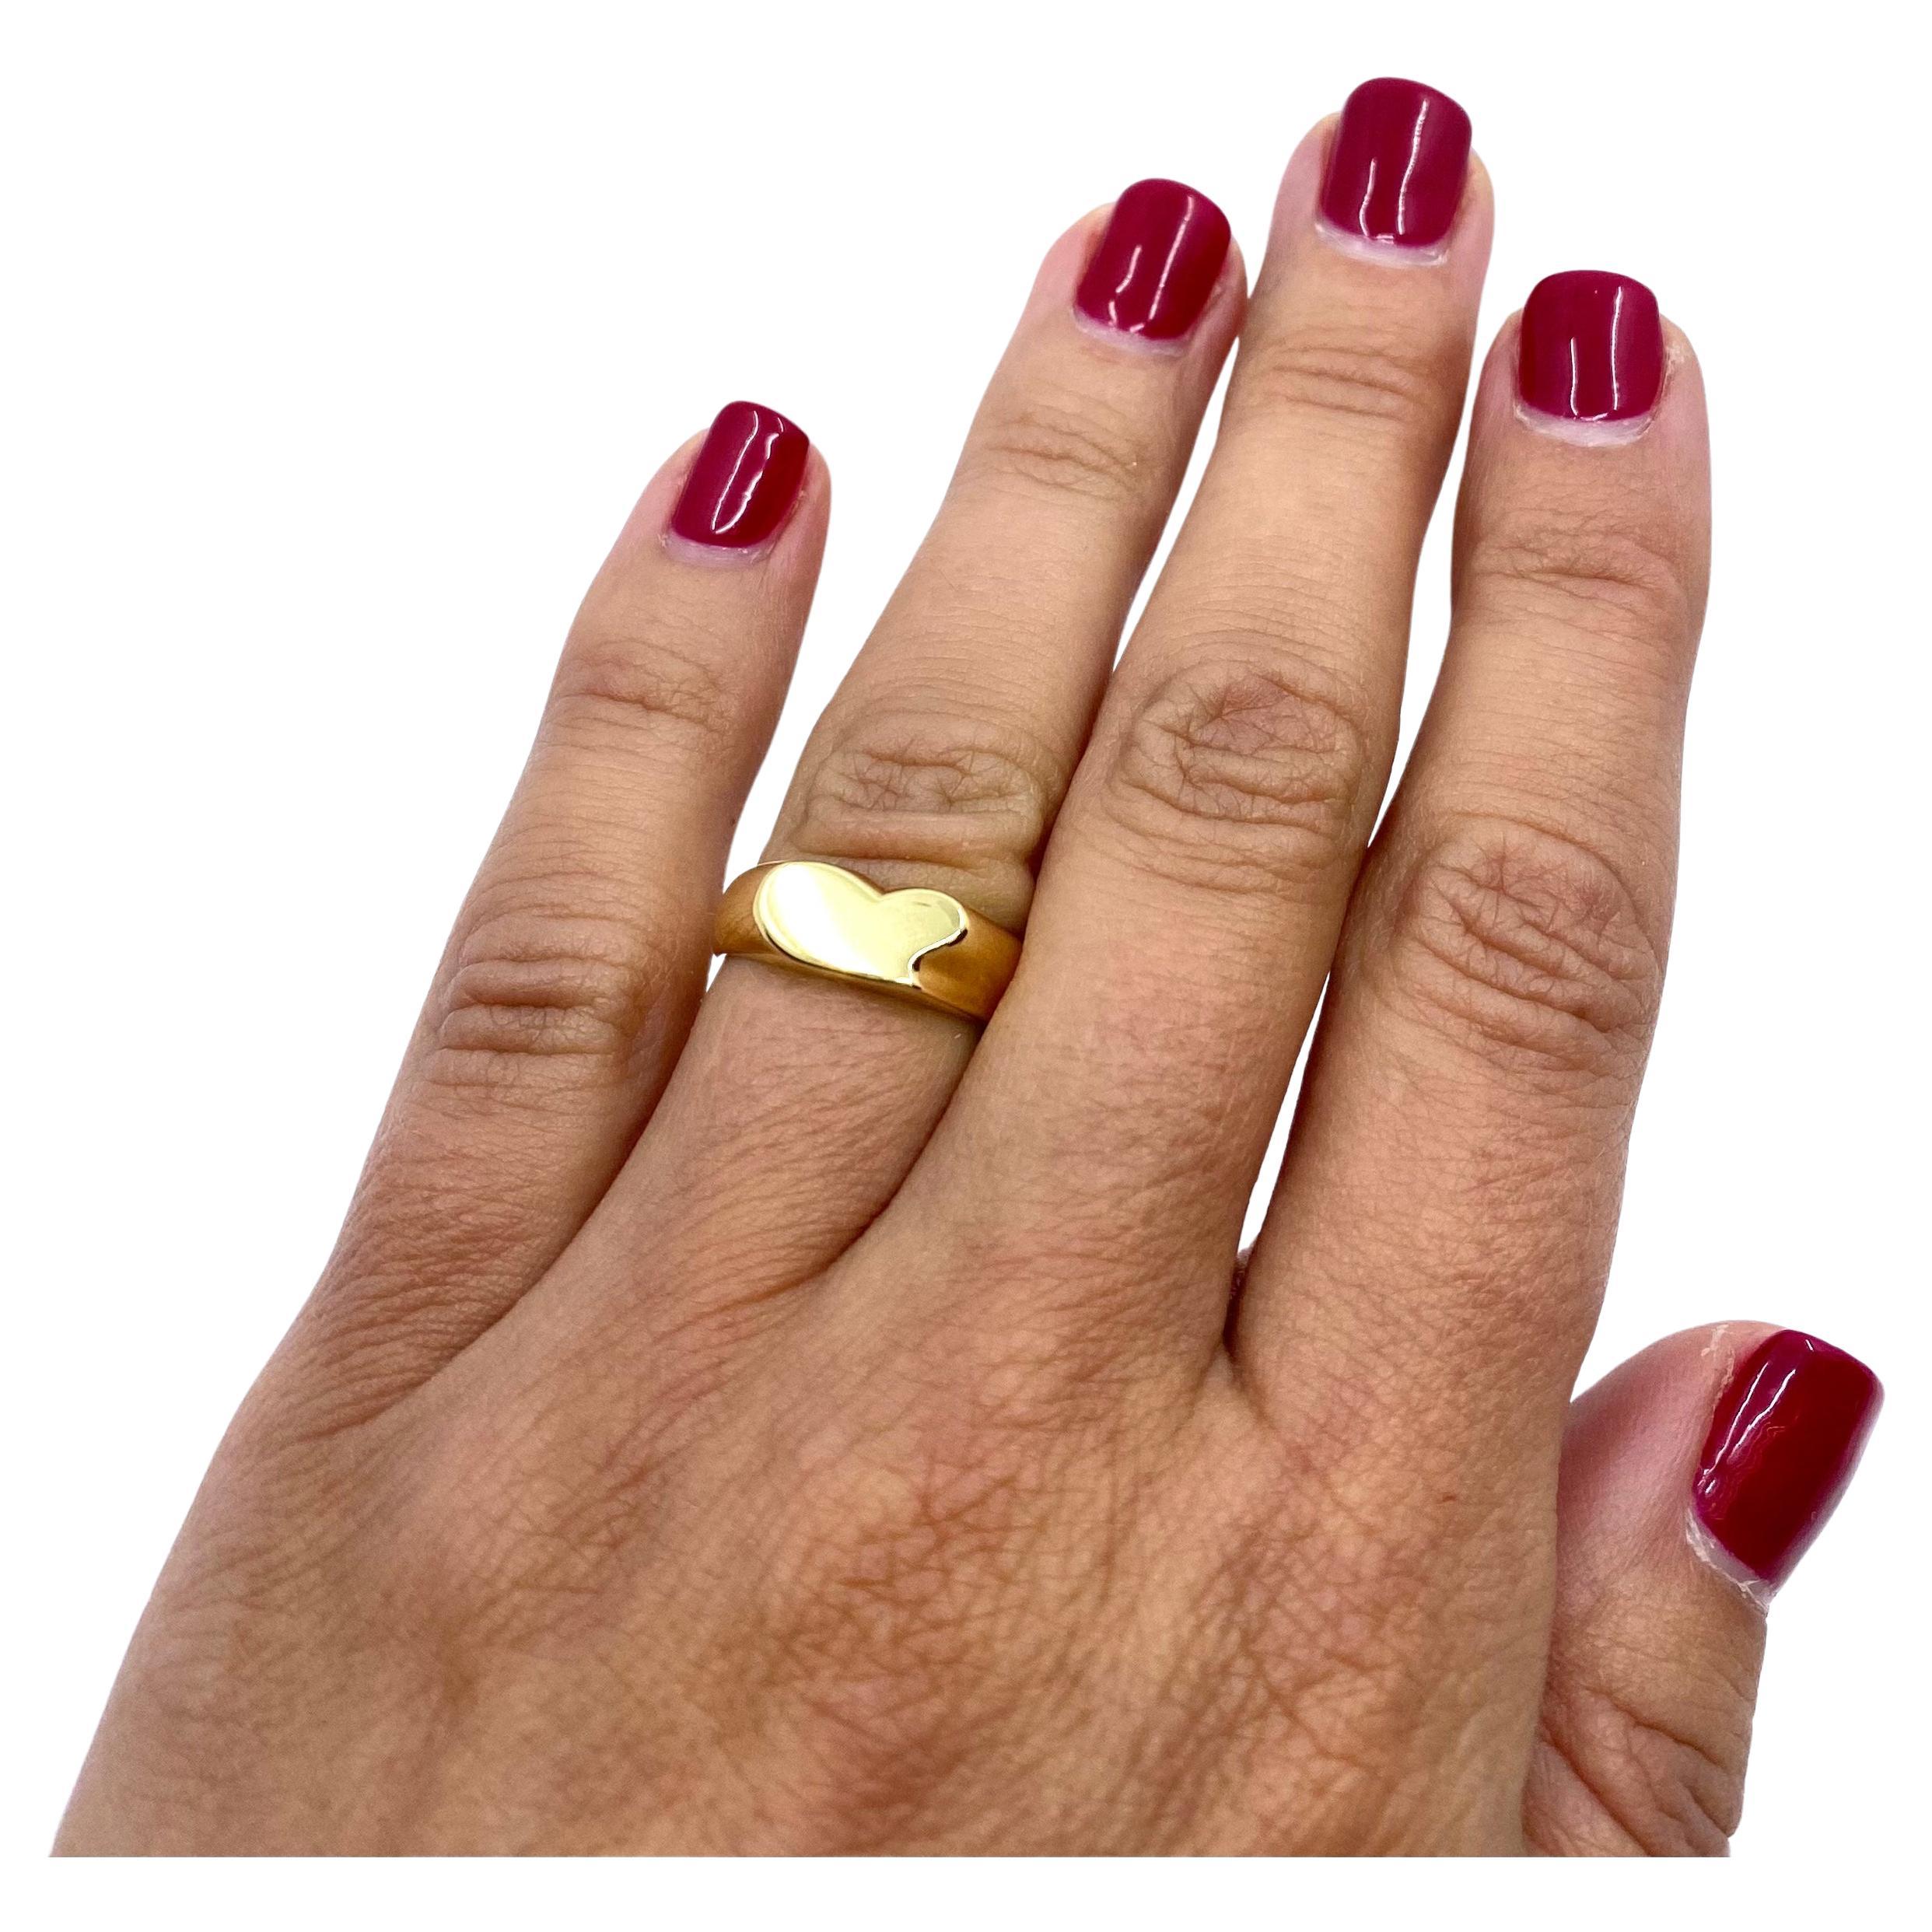 A minimalist Heart ring by Elsa Peretti for Tiffany & Co., made in 18k gold. The ring is crafted as a gold band with a flat stylized heart design. The smoothness of the polished gold and seamless lines of the ring create a perfect shape. With all